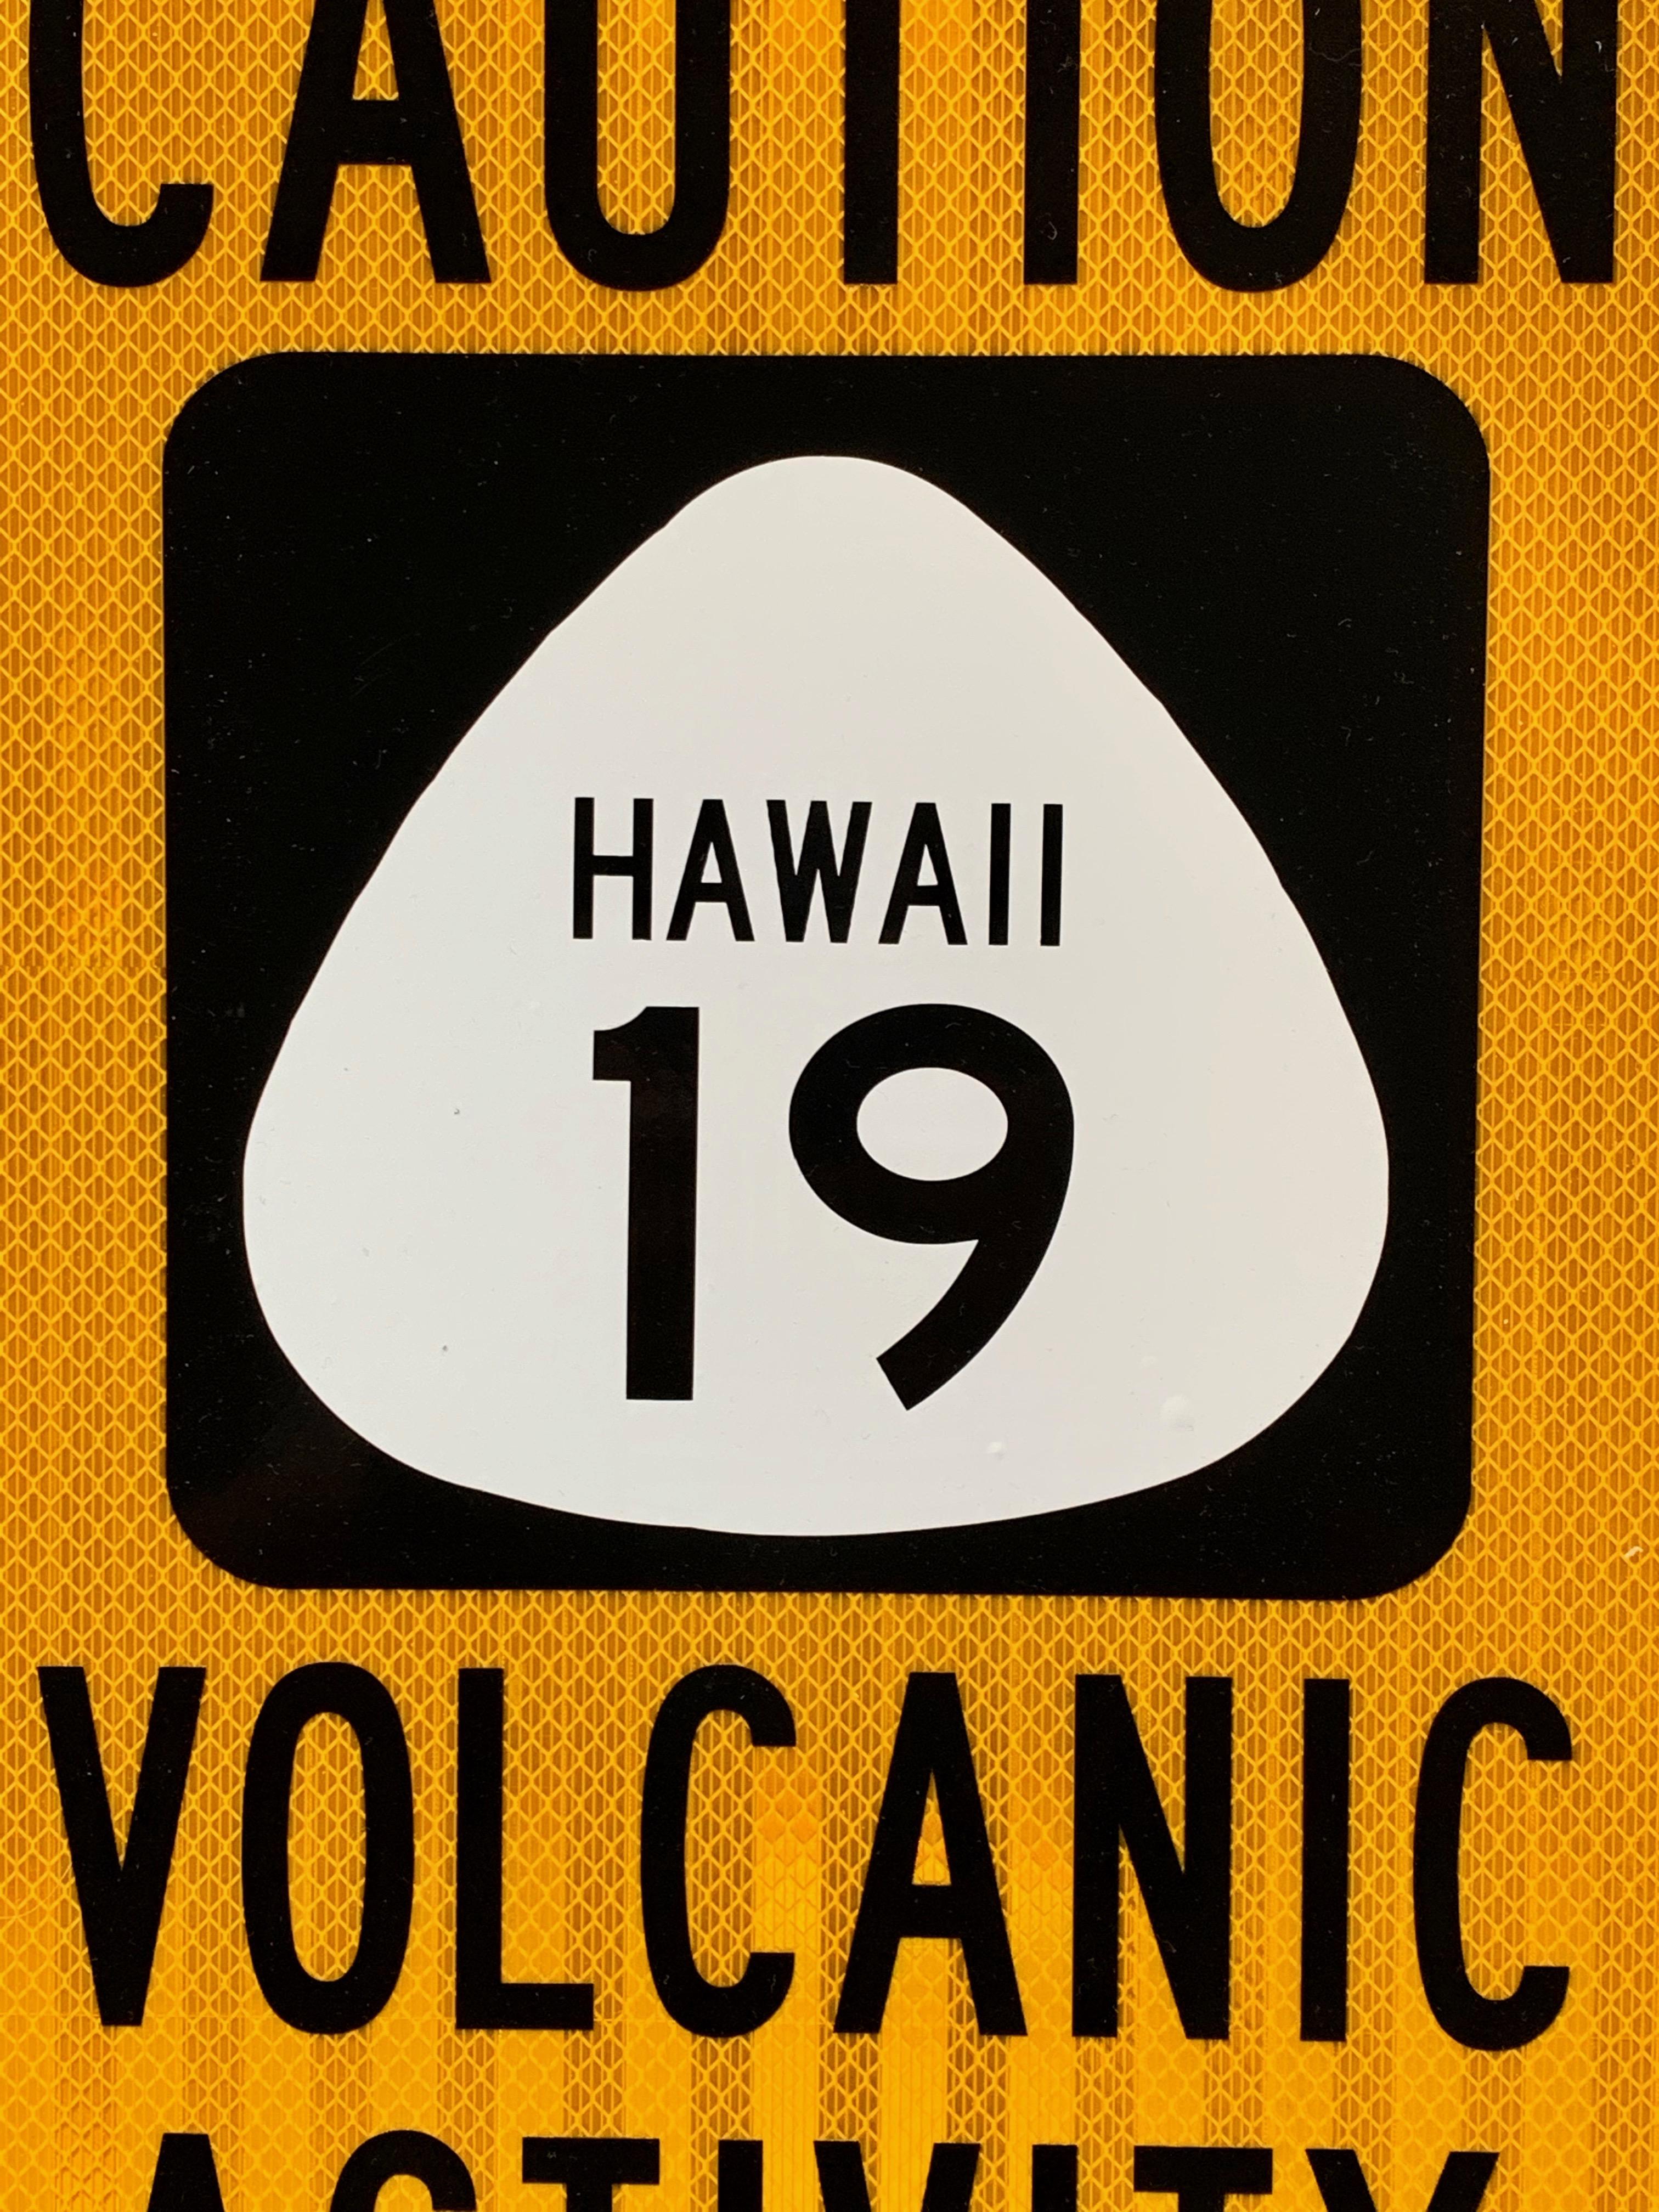 Authentic road sign from Hawaii Route 19. Part of the Mamalahoa Highway on the big island of Hawaii. New old stock, never used. Cool piece of Hawaiiana.